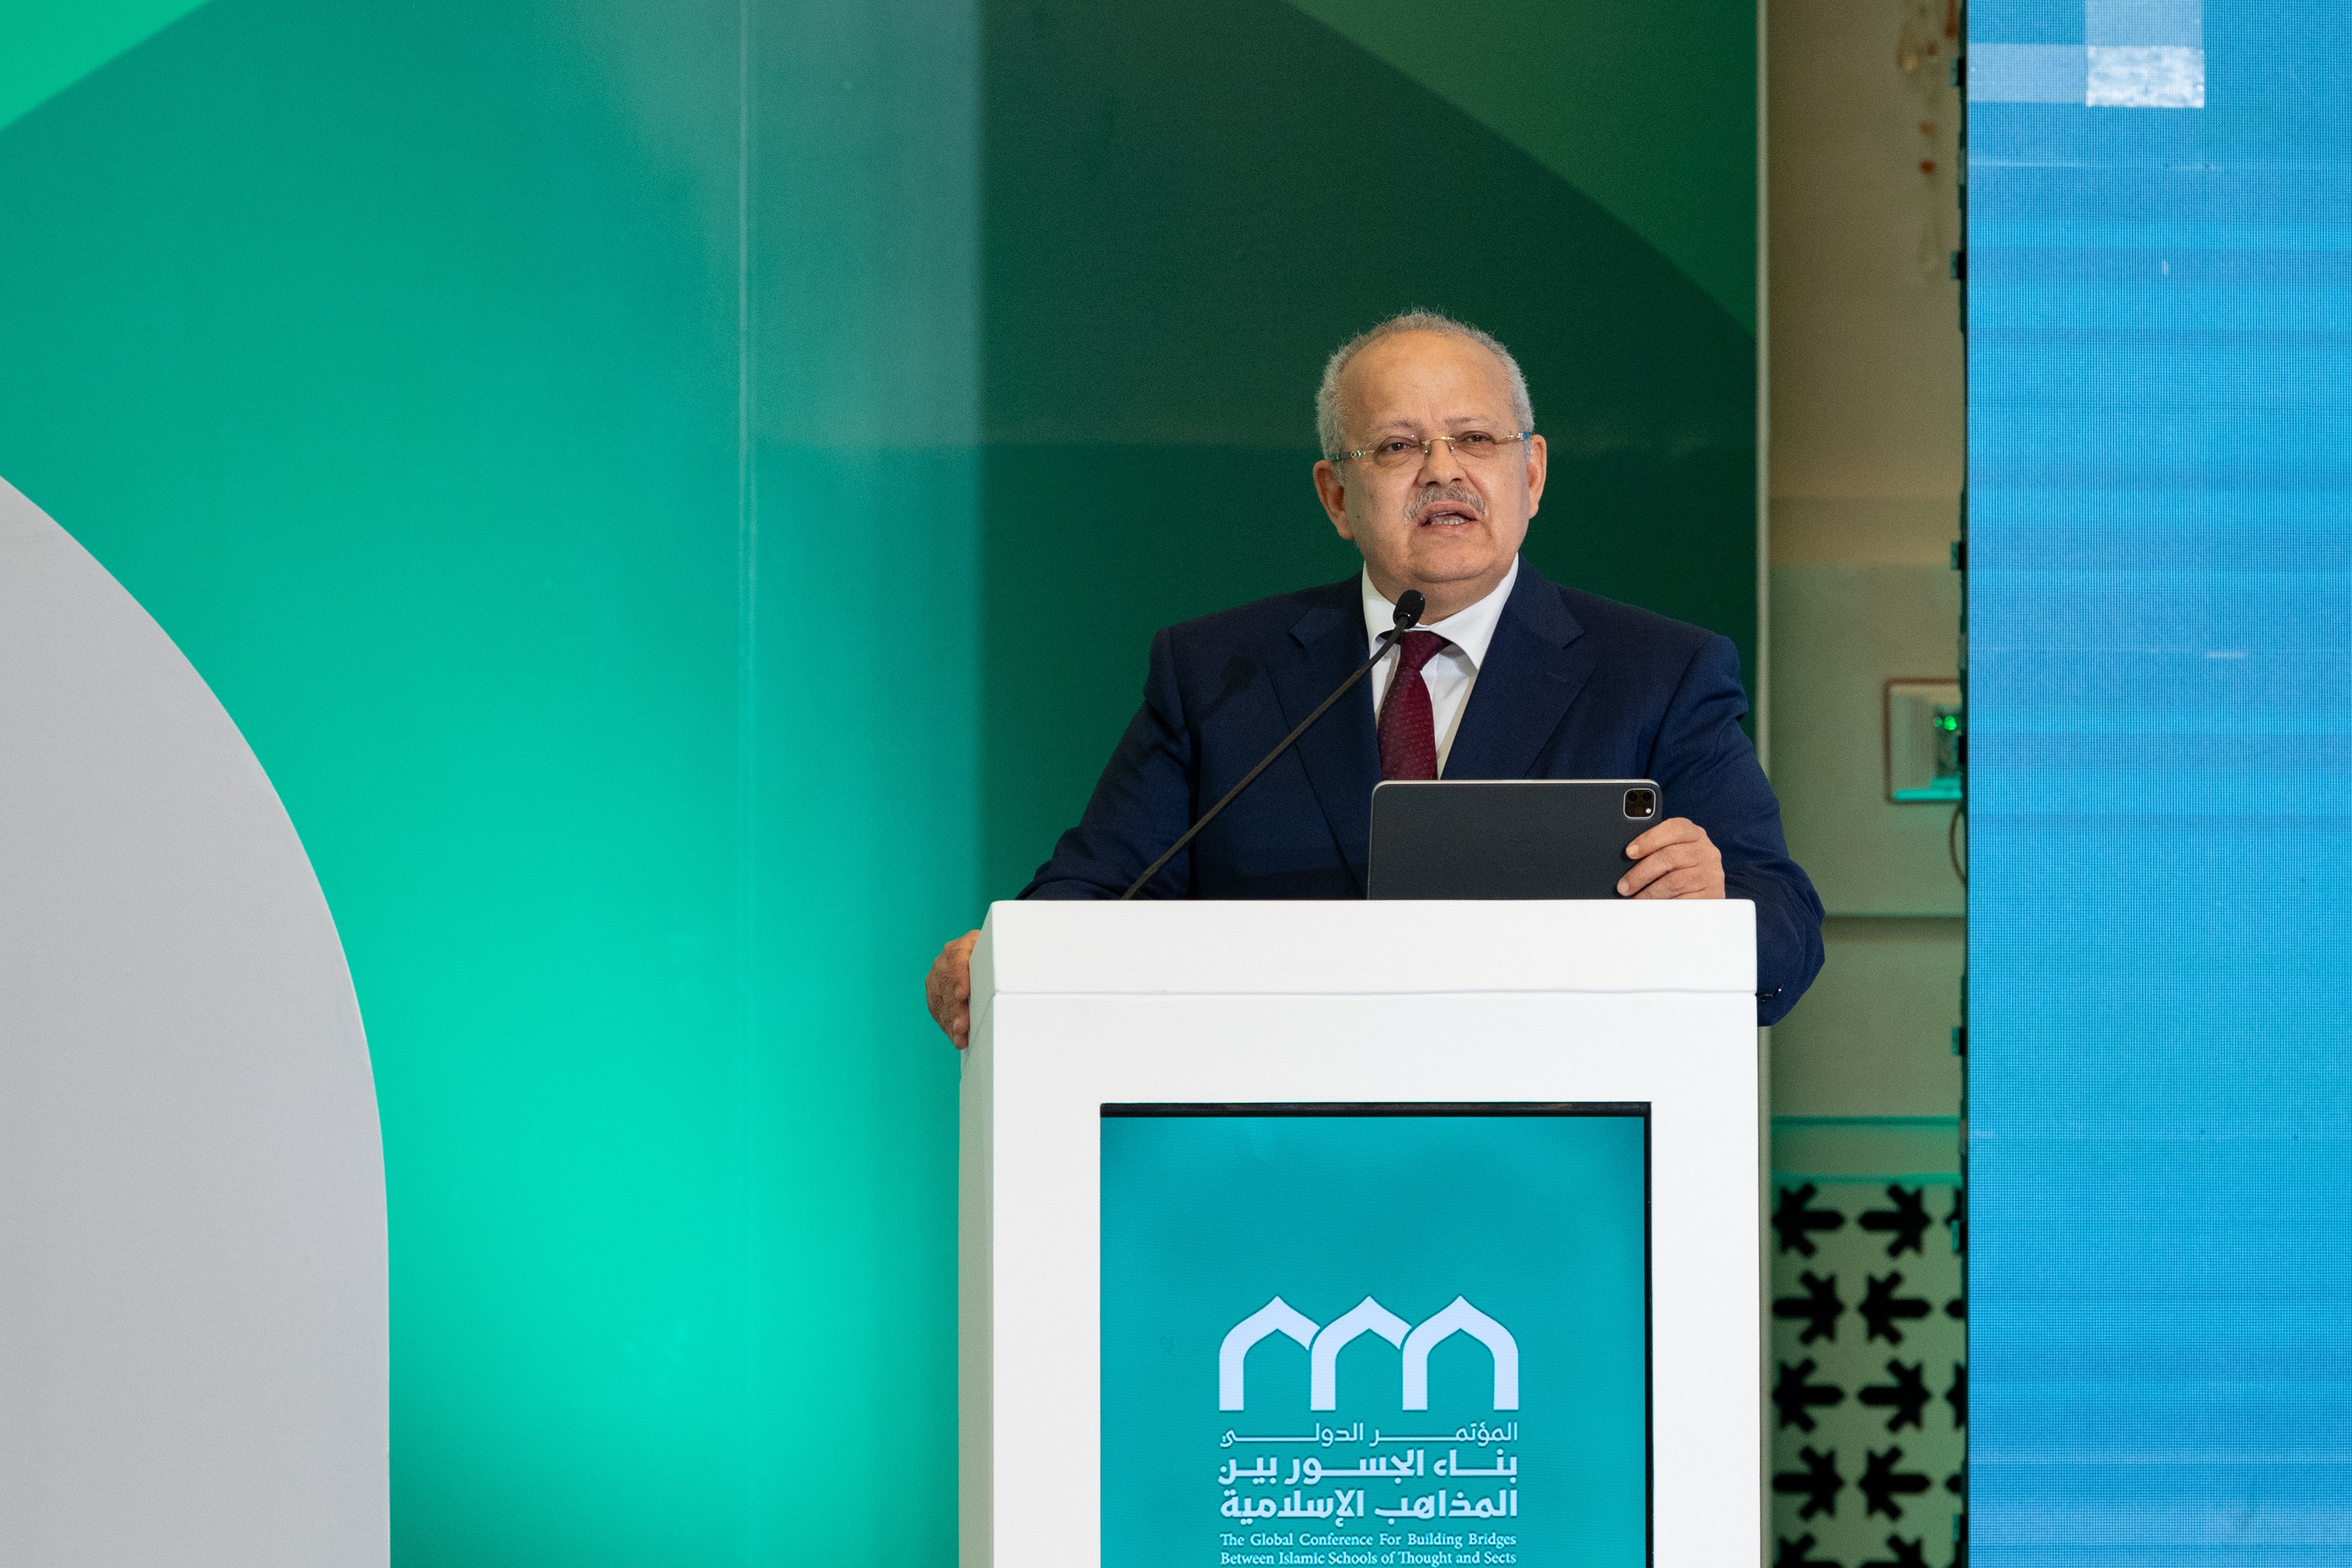 His Excellency Prof. Dr. Mohamed Othman Elkhosht, President of Cairo University, in his speech during the closing session at the Global Conference for Building Bridges between Islamic Schools of Thought and Sects